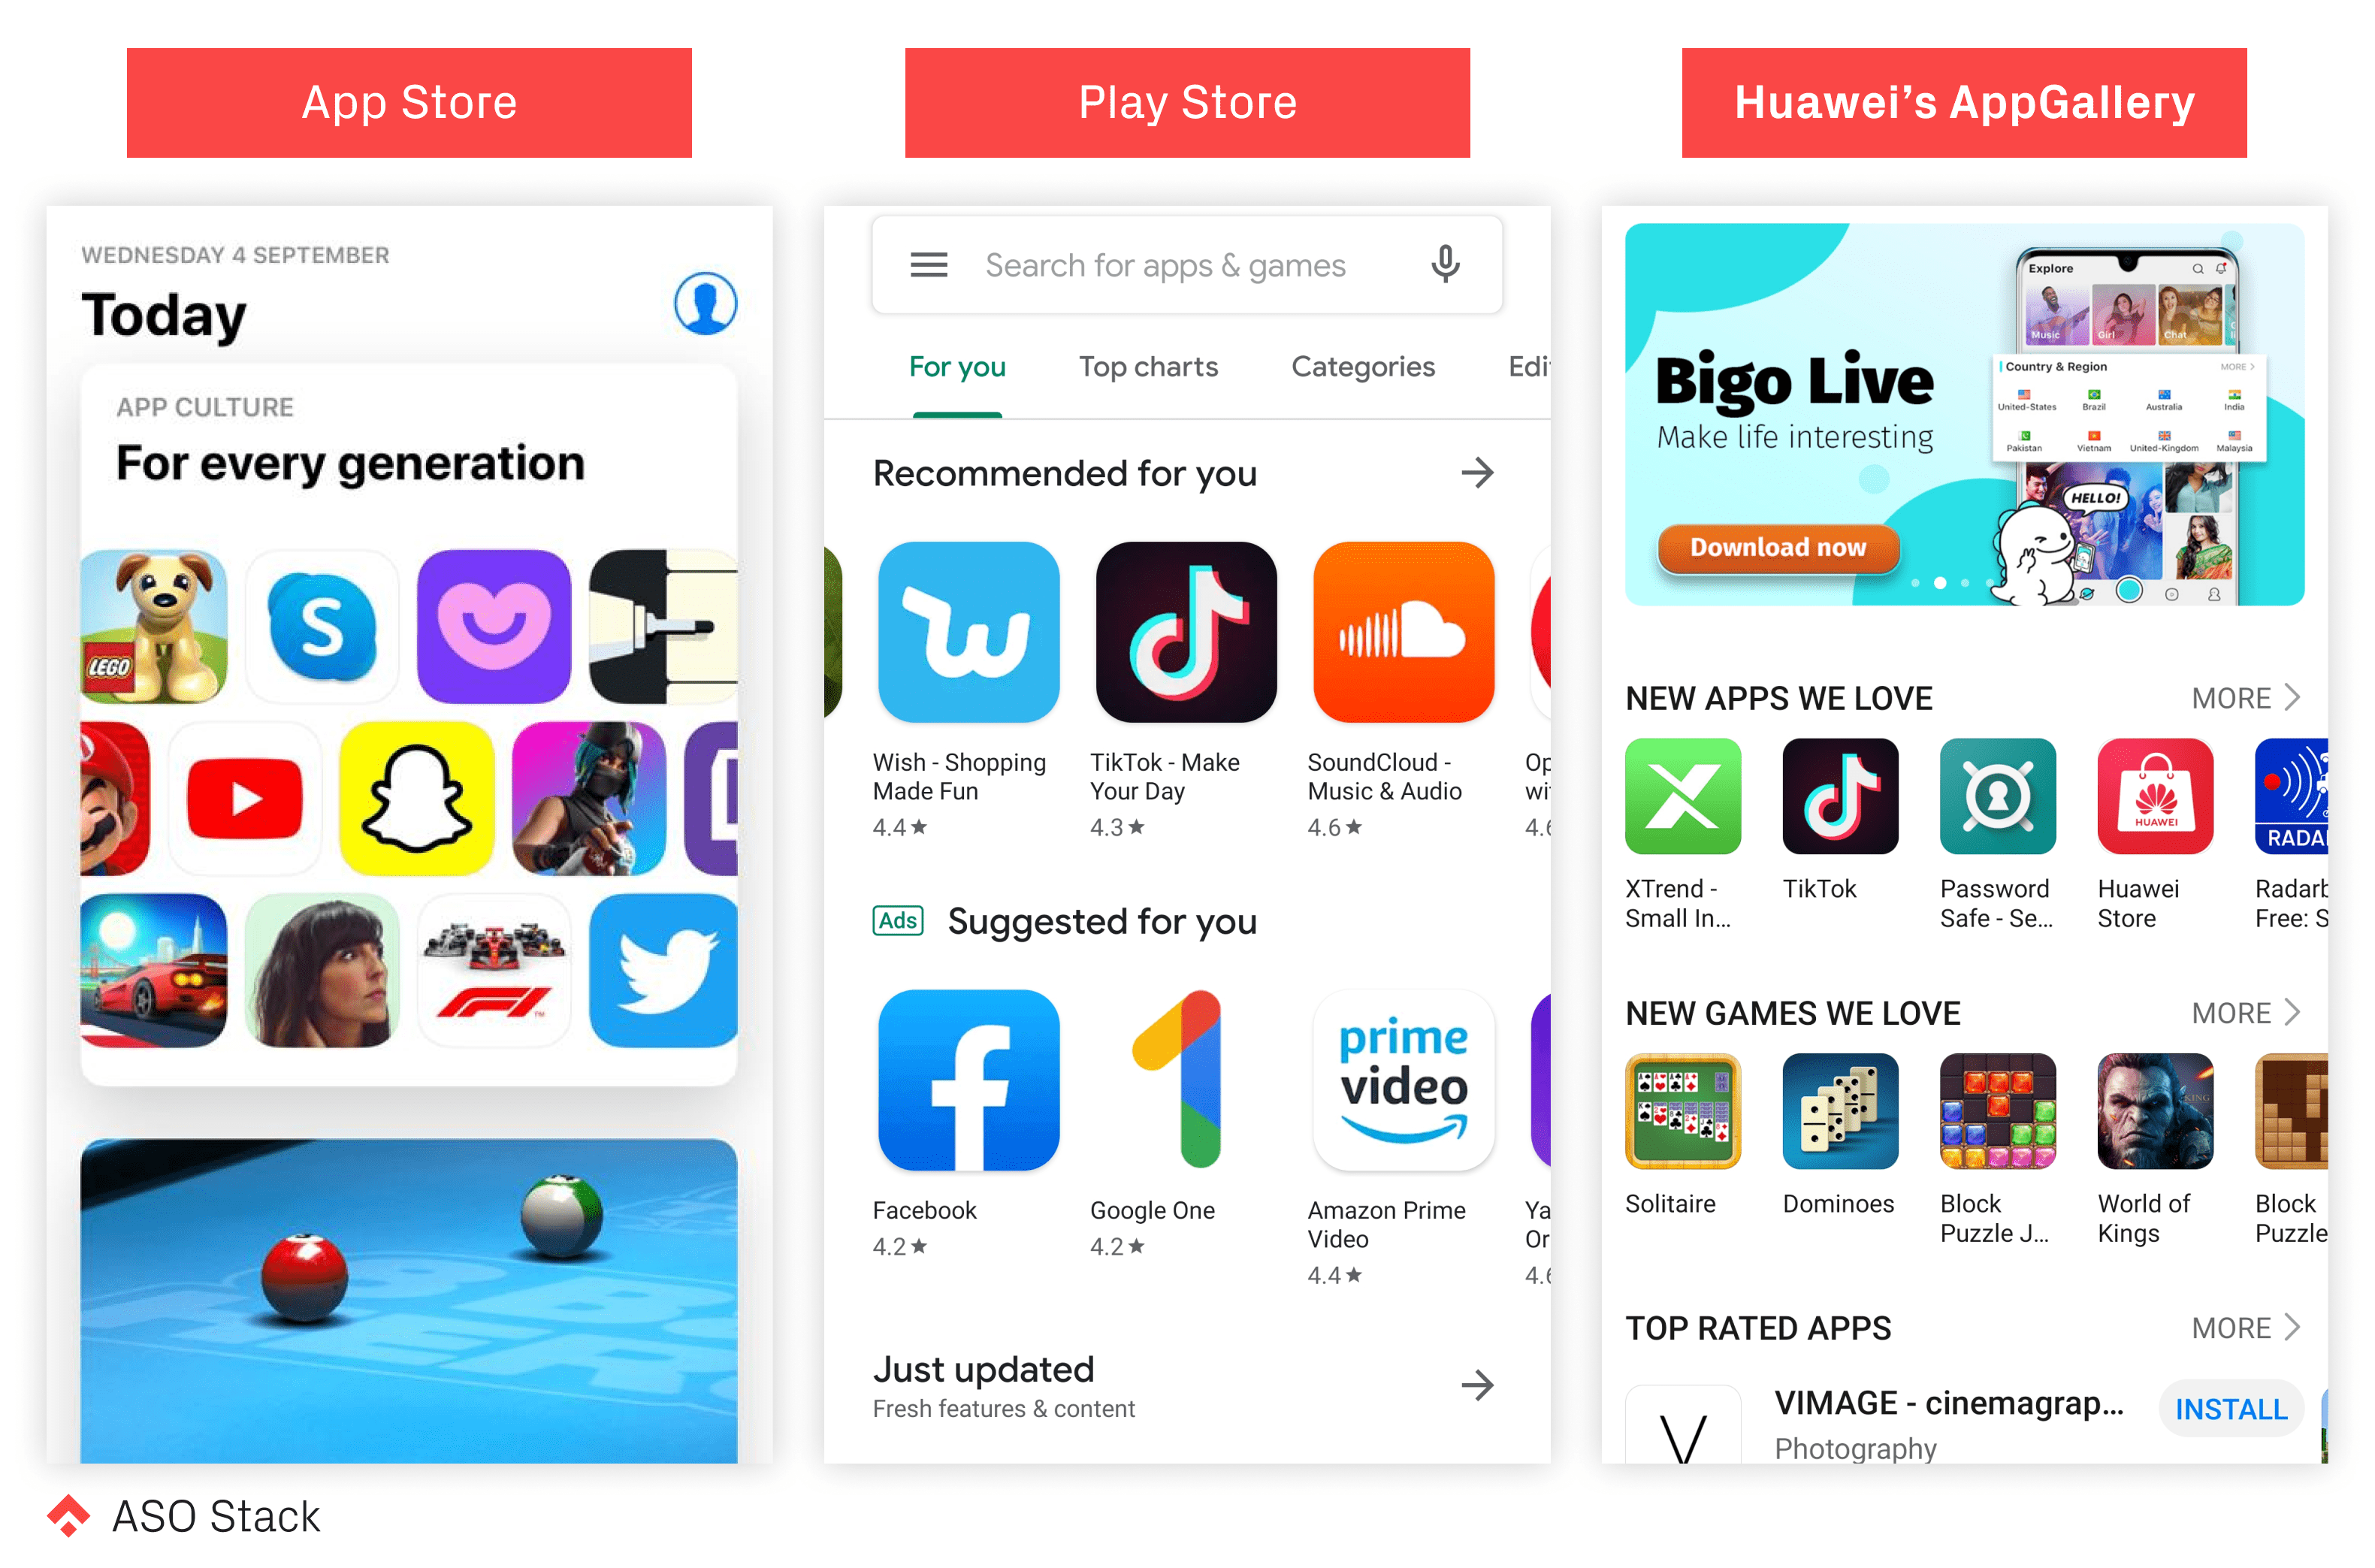 app store, play store and appgallery